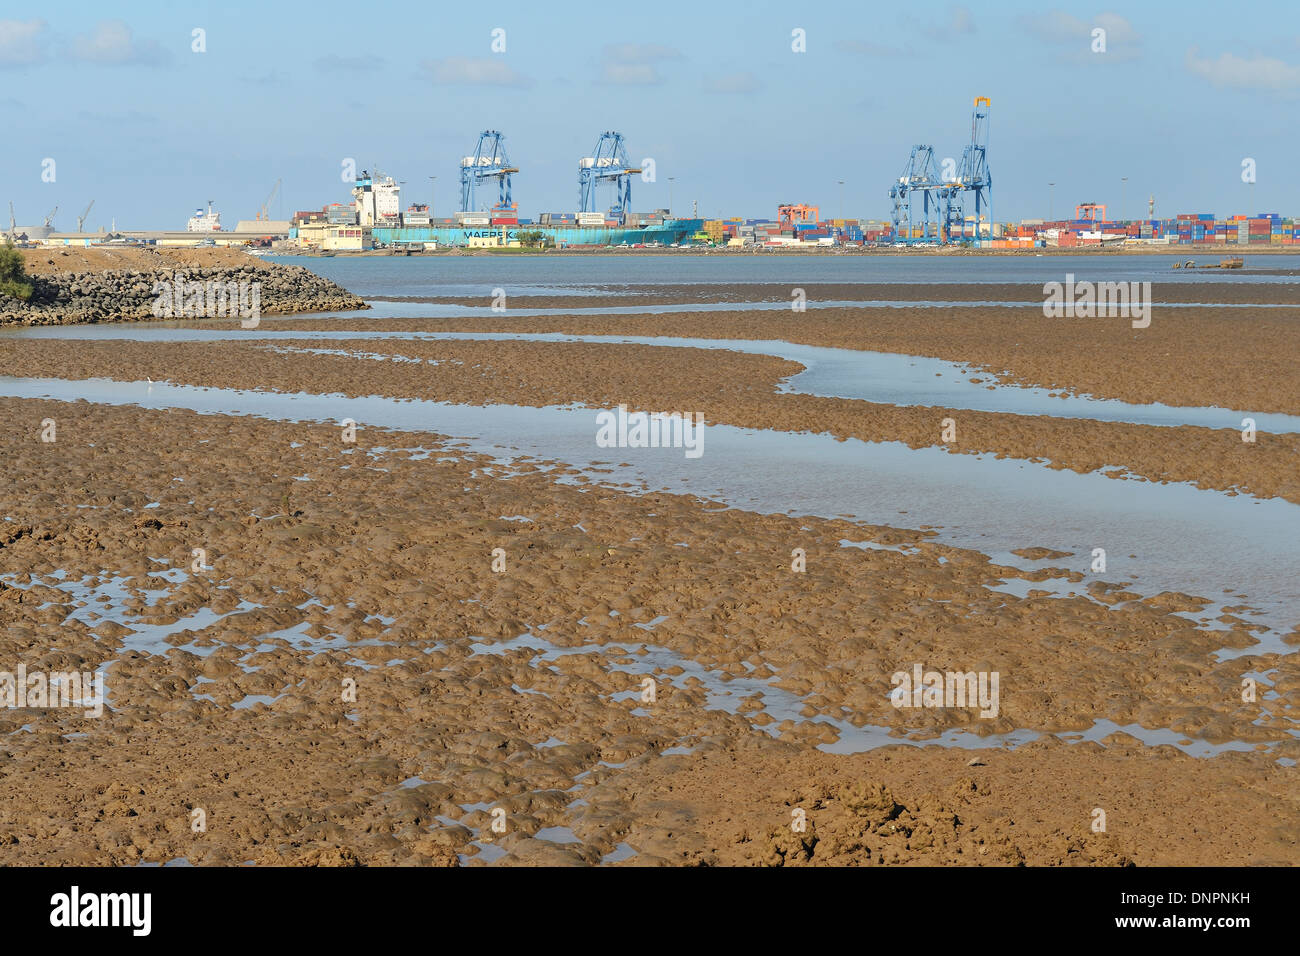 Commercial harbour of Djibouti city, Djibouti, Horn of Africa Stock Photo